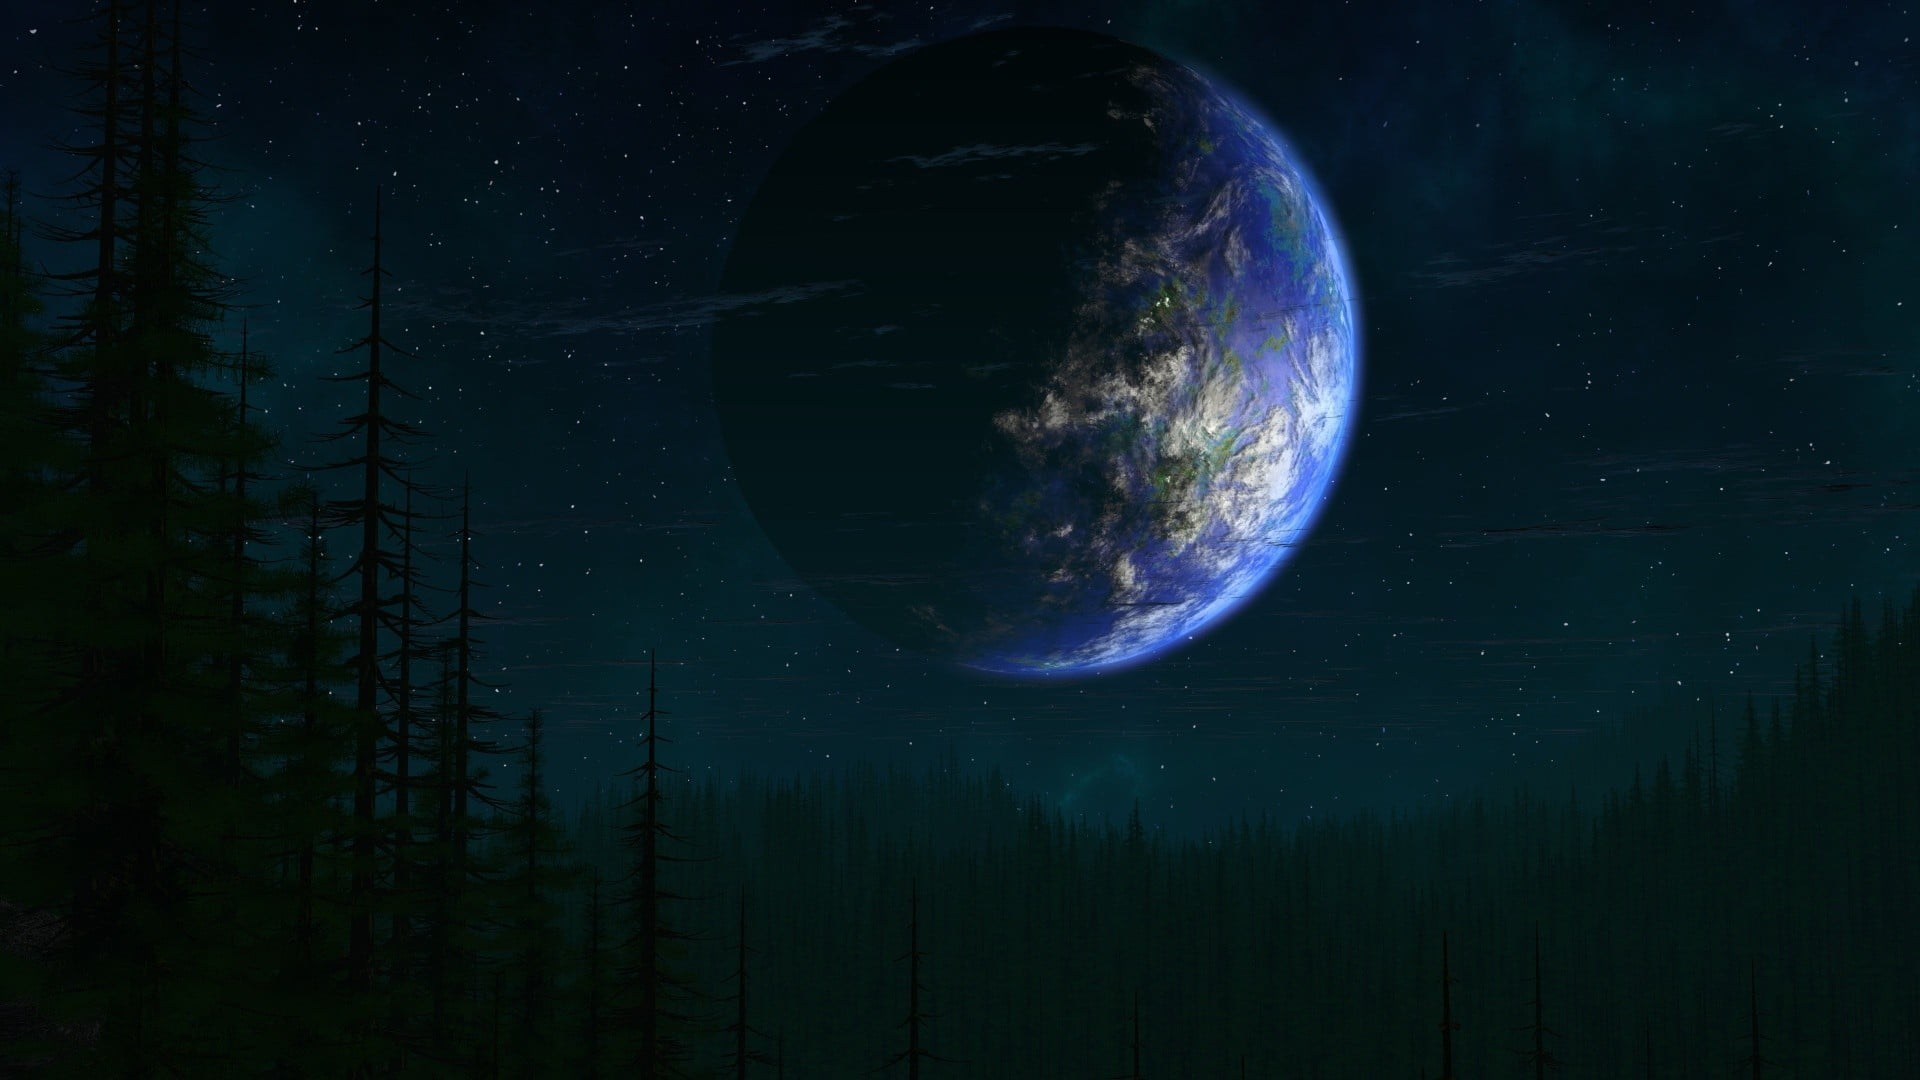 planet earth screenshot #planet #Minecraft #space #stars #glowing #dark  digital art #3D #river #fores…